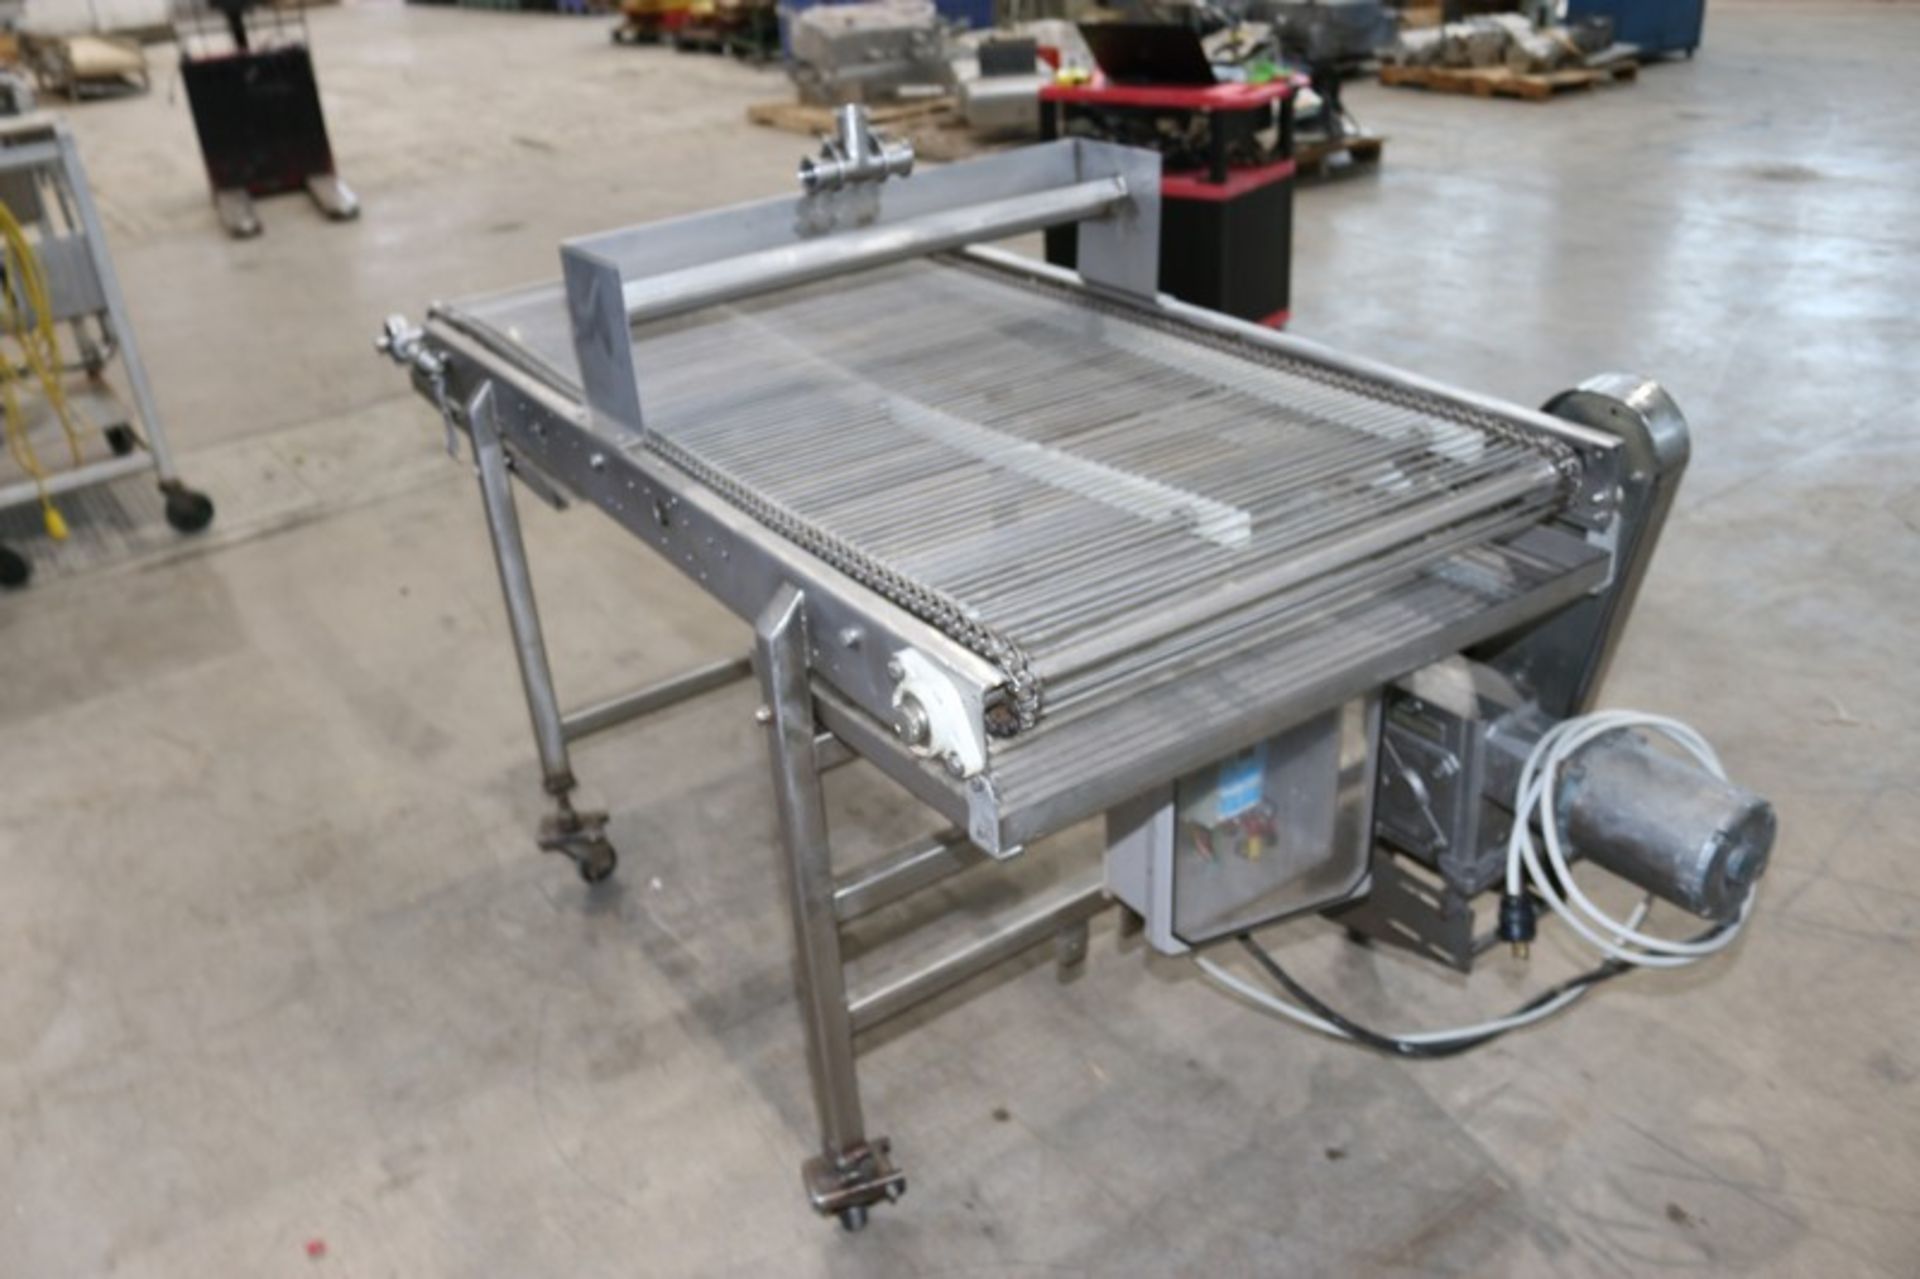 Straight Section of S/S Conveyor, with Top Applicator Mounted, Aprox. 29" W Belt with Motor, Mounted - Image 5 of 6